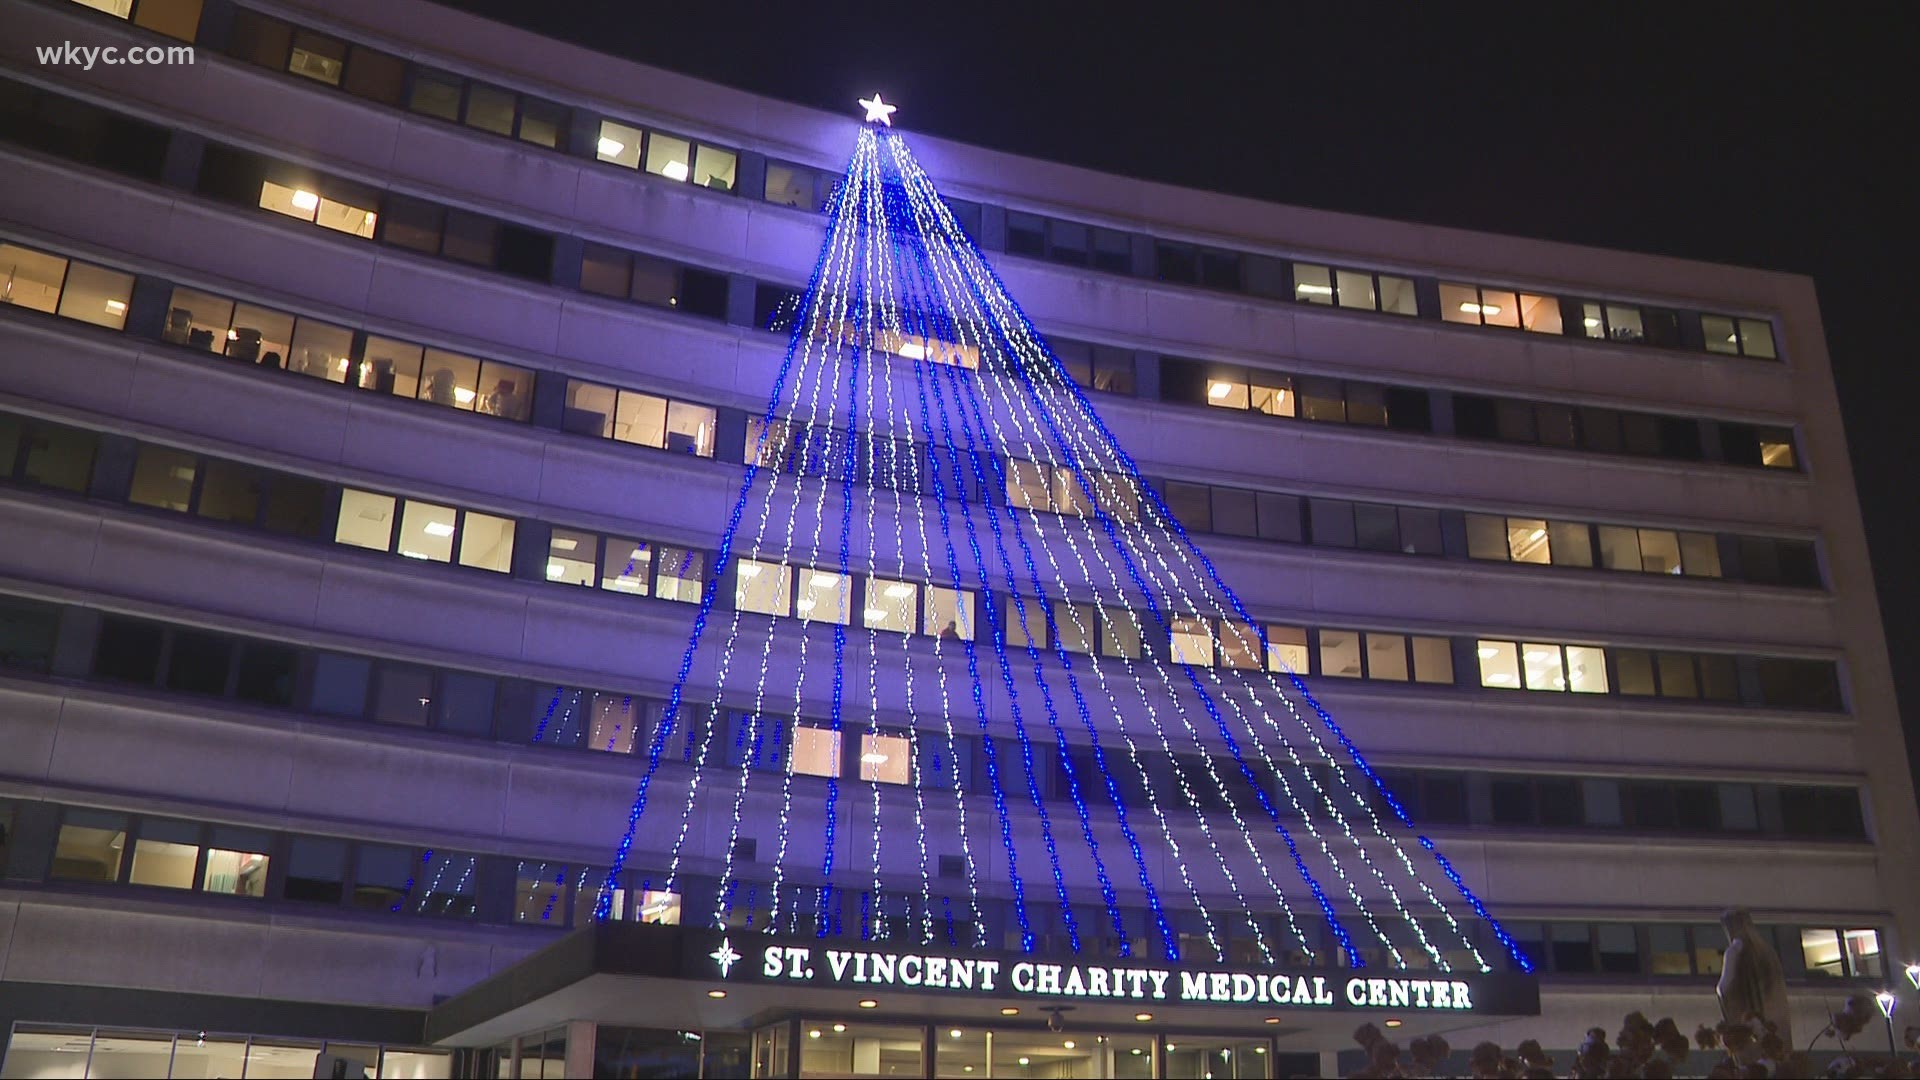 Thanks to donors, on Wednesday night, St. Vincent Charity Medical Center hosted their tree lighting ceremony. It honors front line workers during the pandemic.